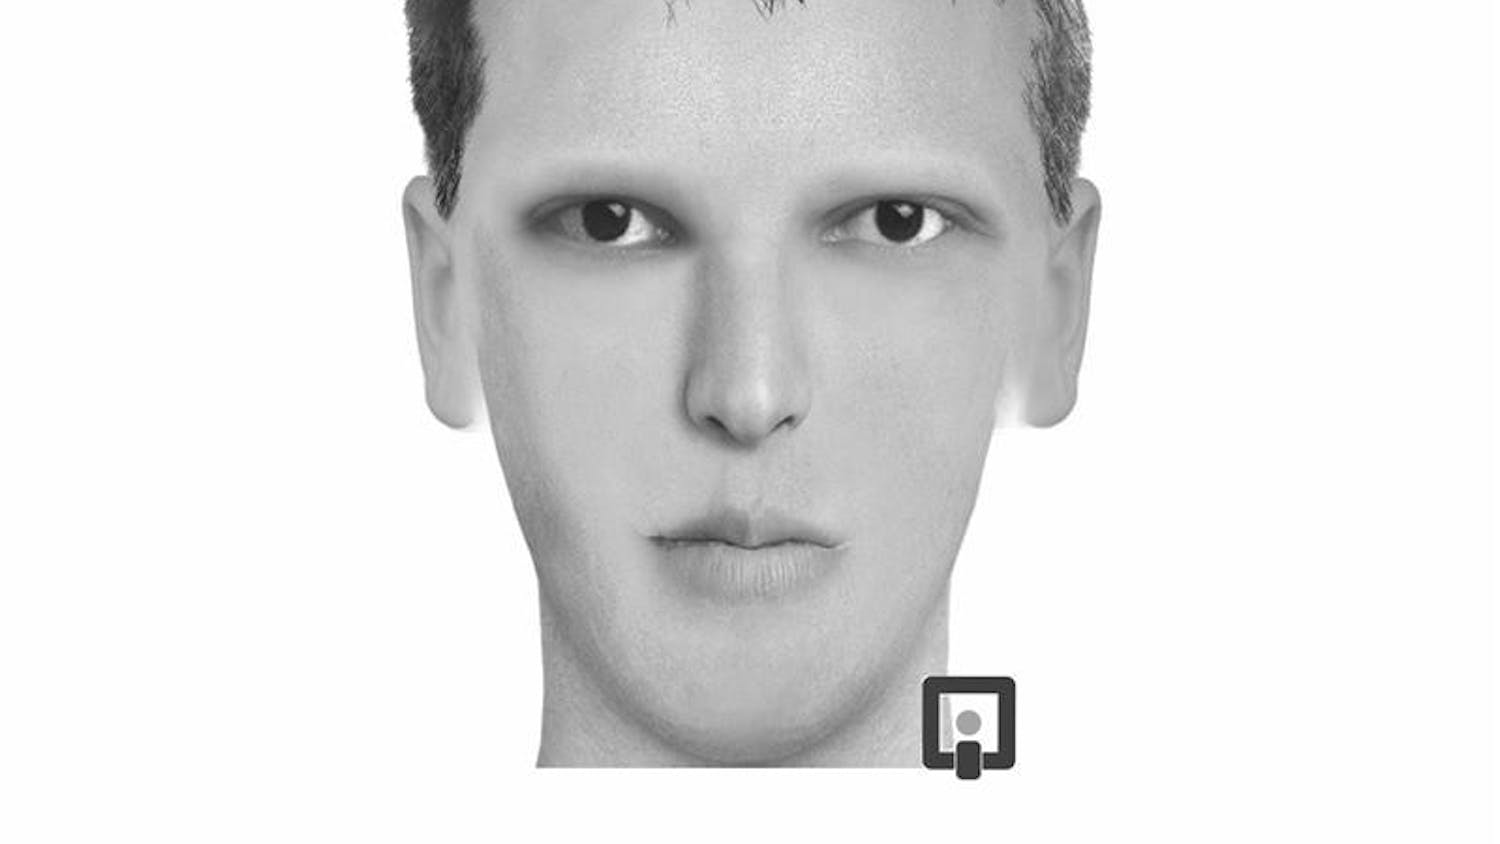 This is a composite of the suspect who assaulted three IU students on their walk back to their residence halls. He is an 18 to 20-year-old slim, white male who was wearing a white hoodie, a yellow T-shirt and jeans at the time of the assaults.